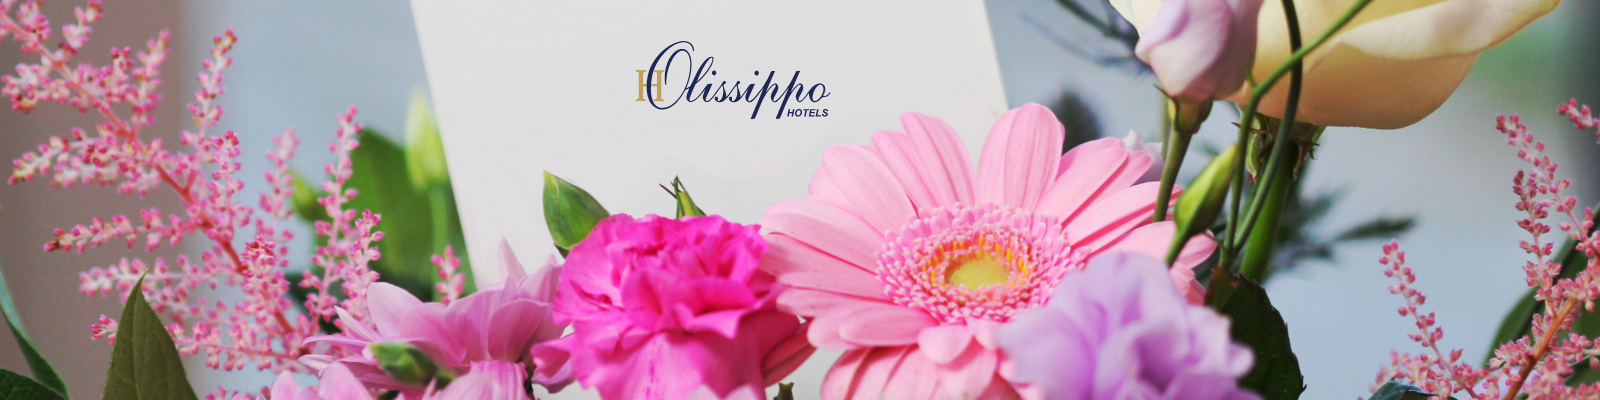 Promotions Olissippo Hotels